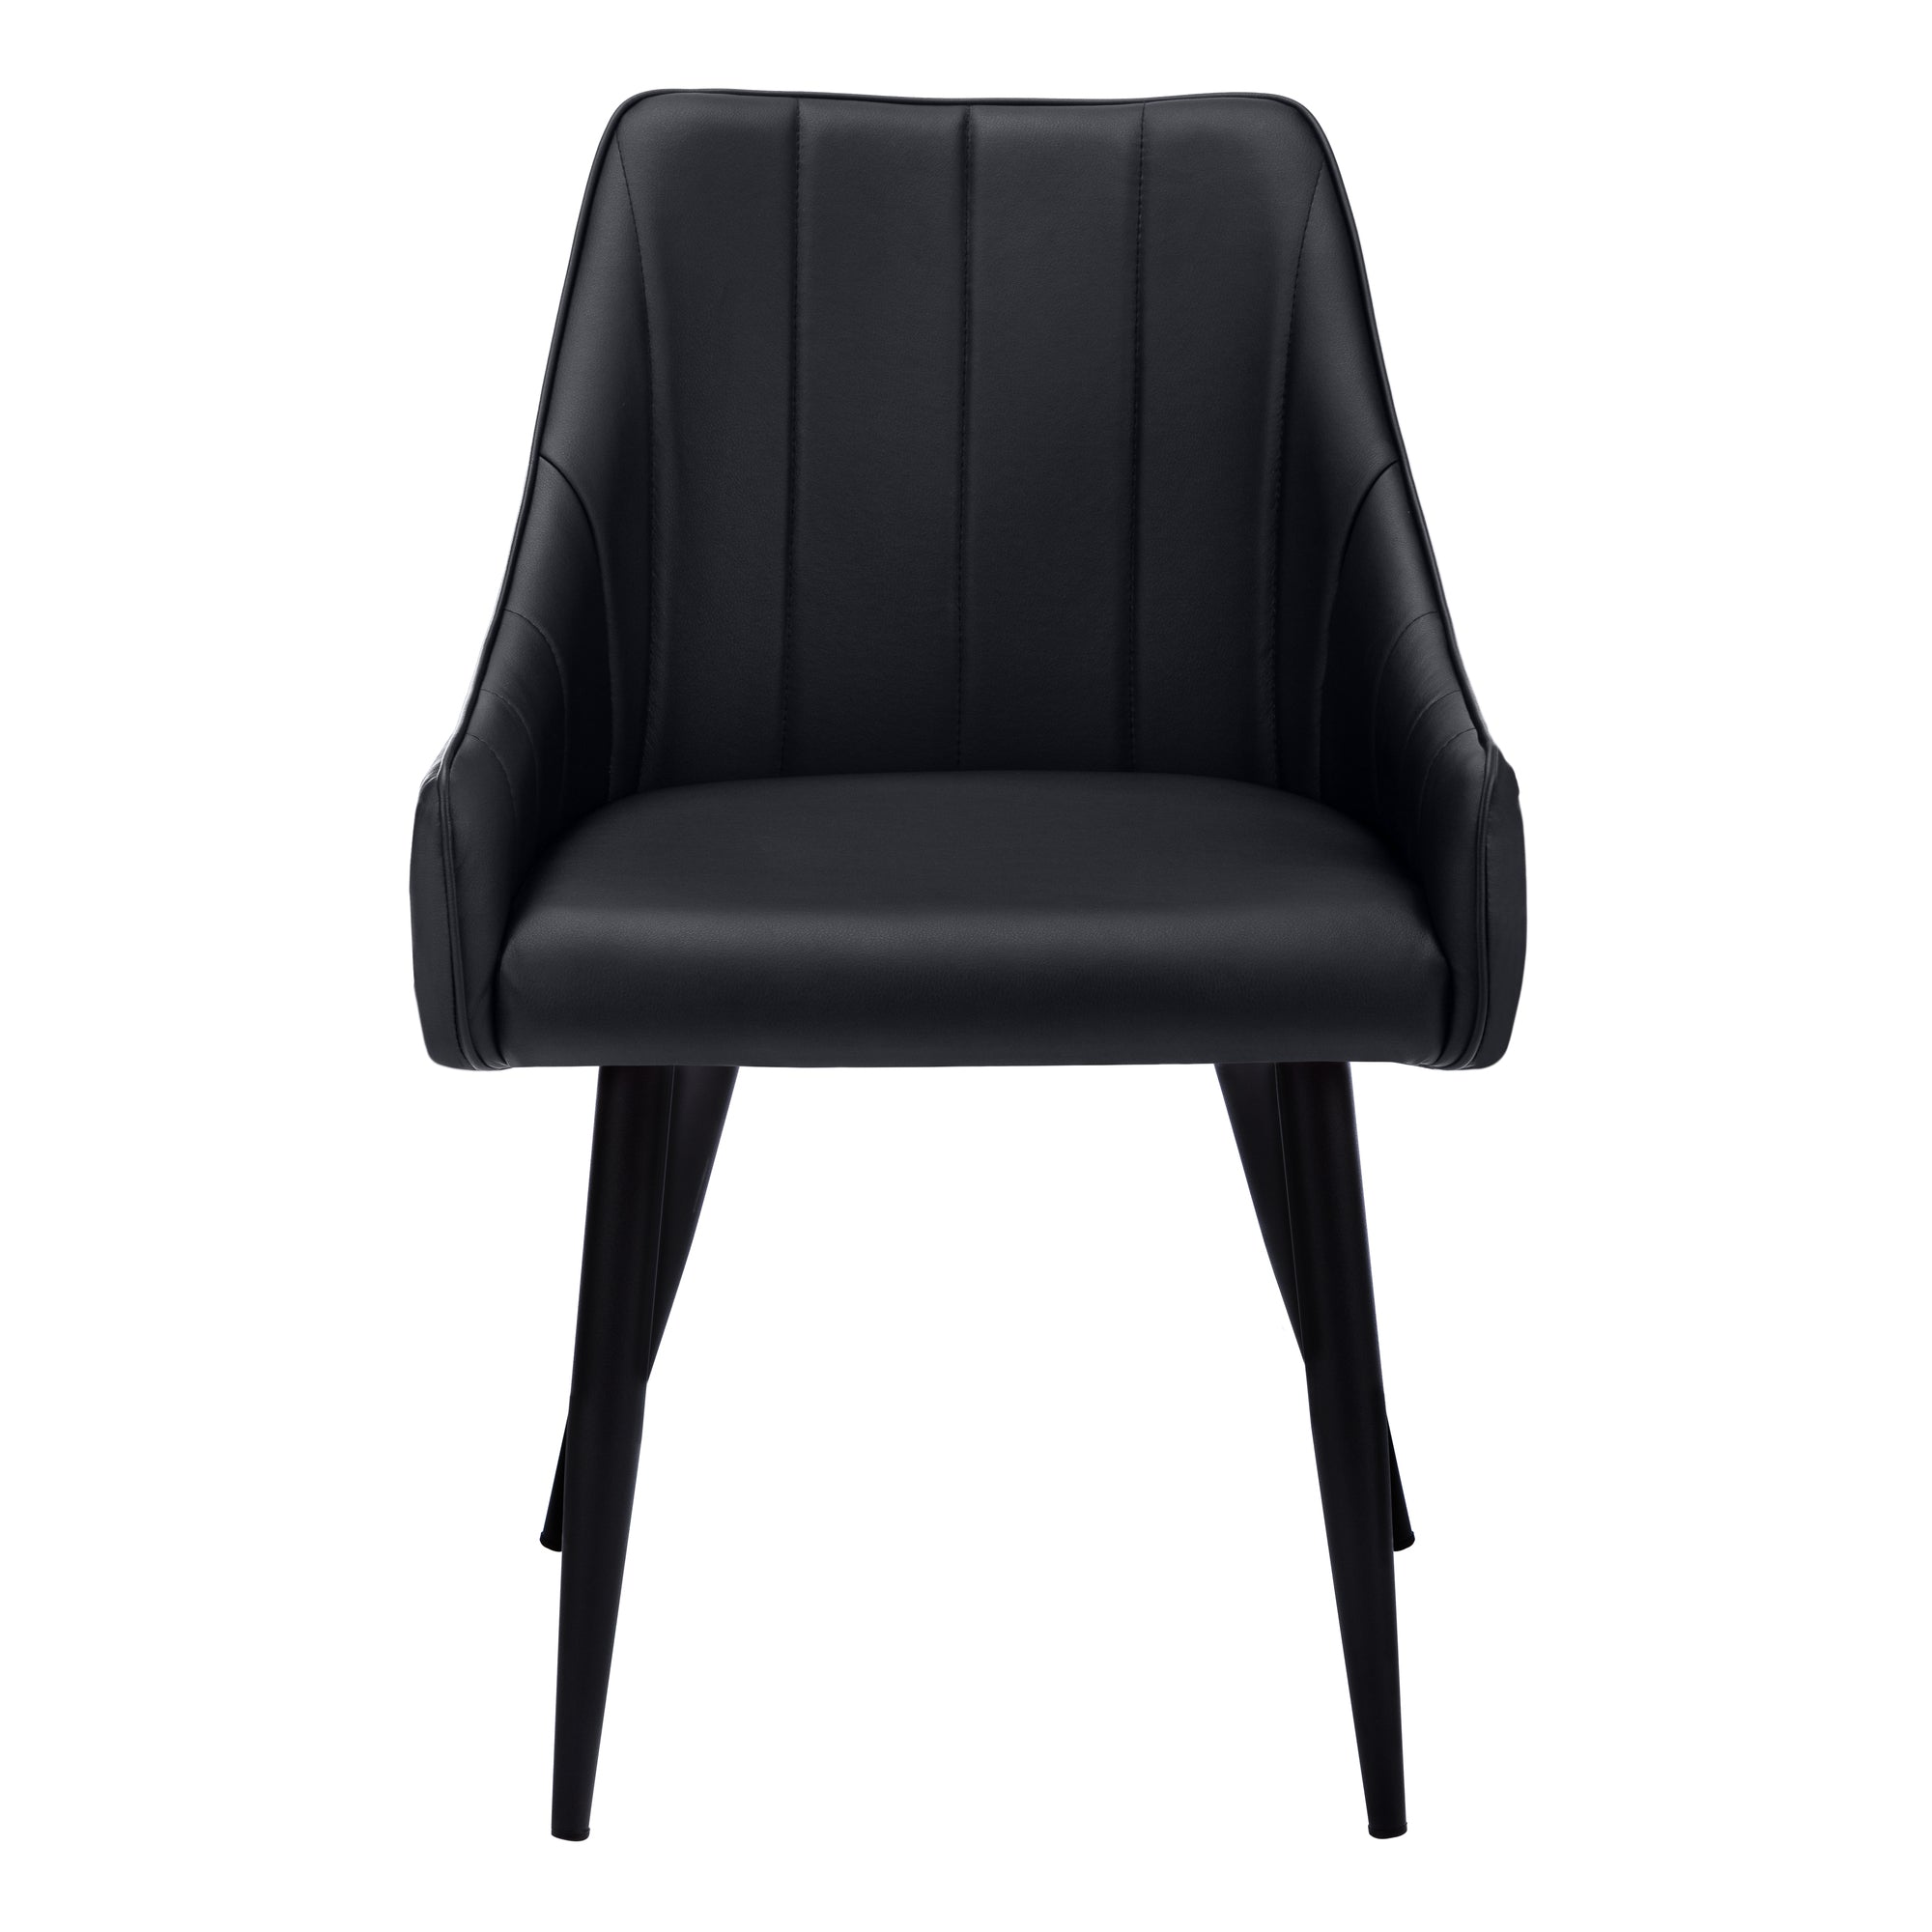 Dining Chair - 2Pcs / 33H / Black Leather-Look / Black